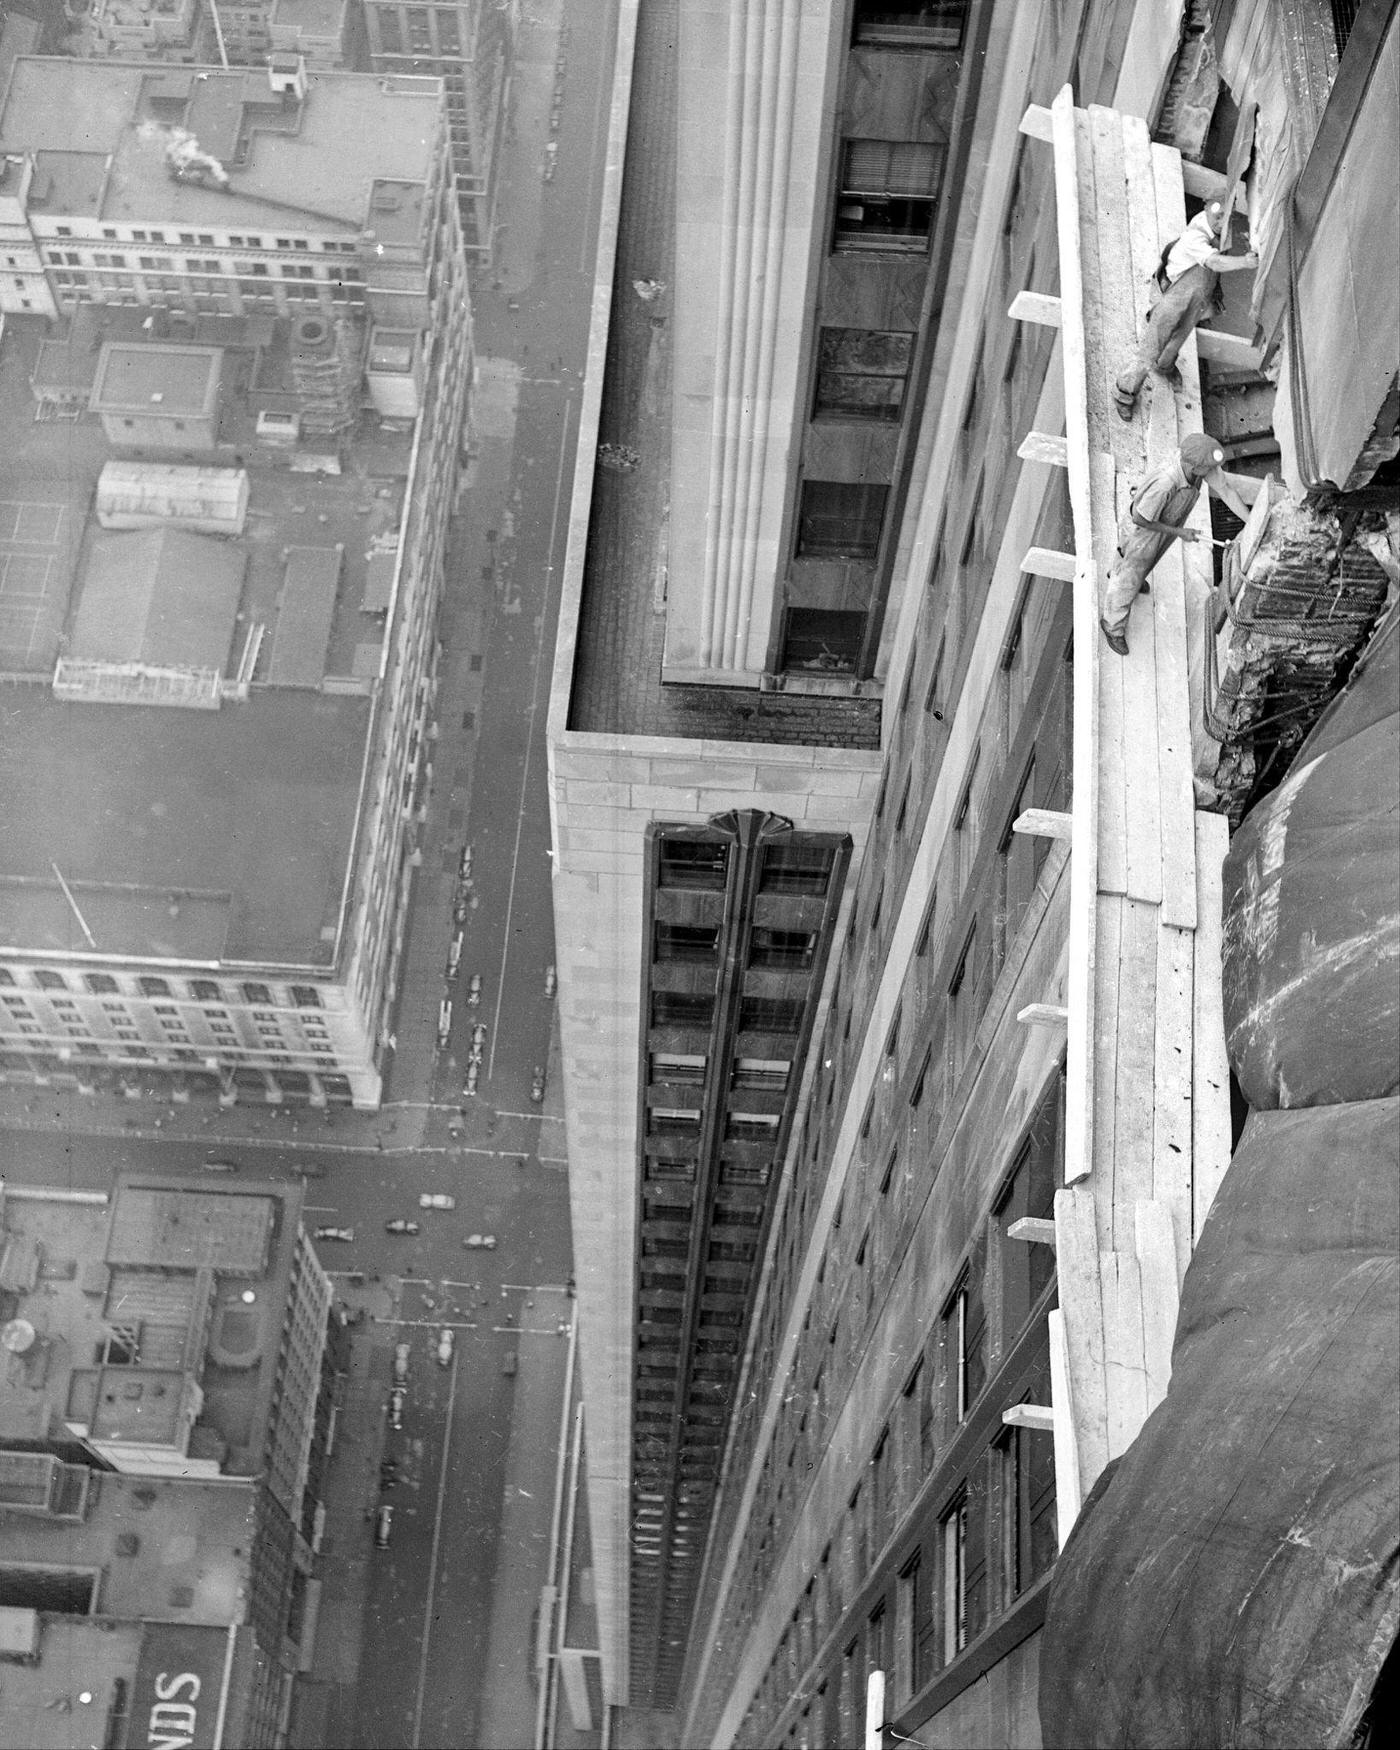 Workmen begin the costly job of repairing the damage done to the worl'd highest building the freak plane crash.